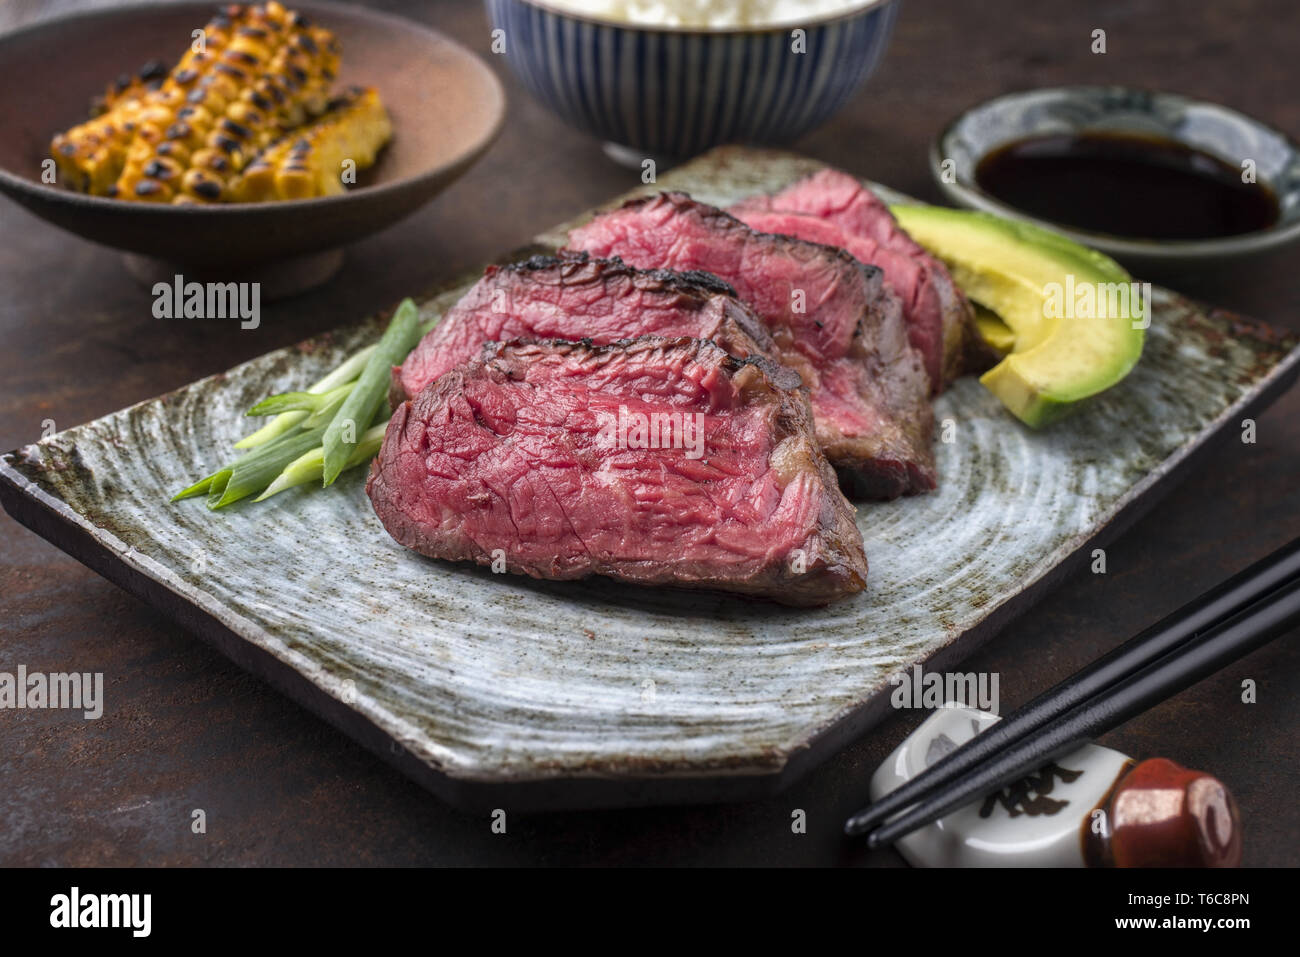 Japanese Kobe Steak Fillet with Rice and Avocado as close-up on a ...